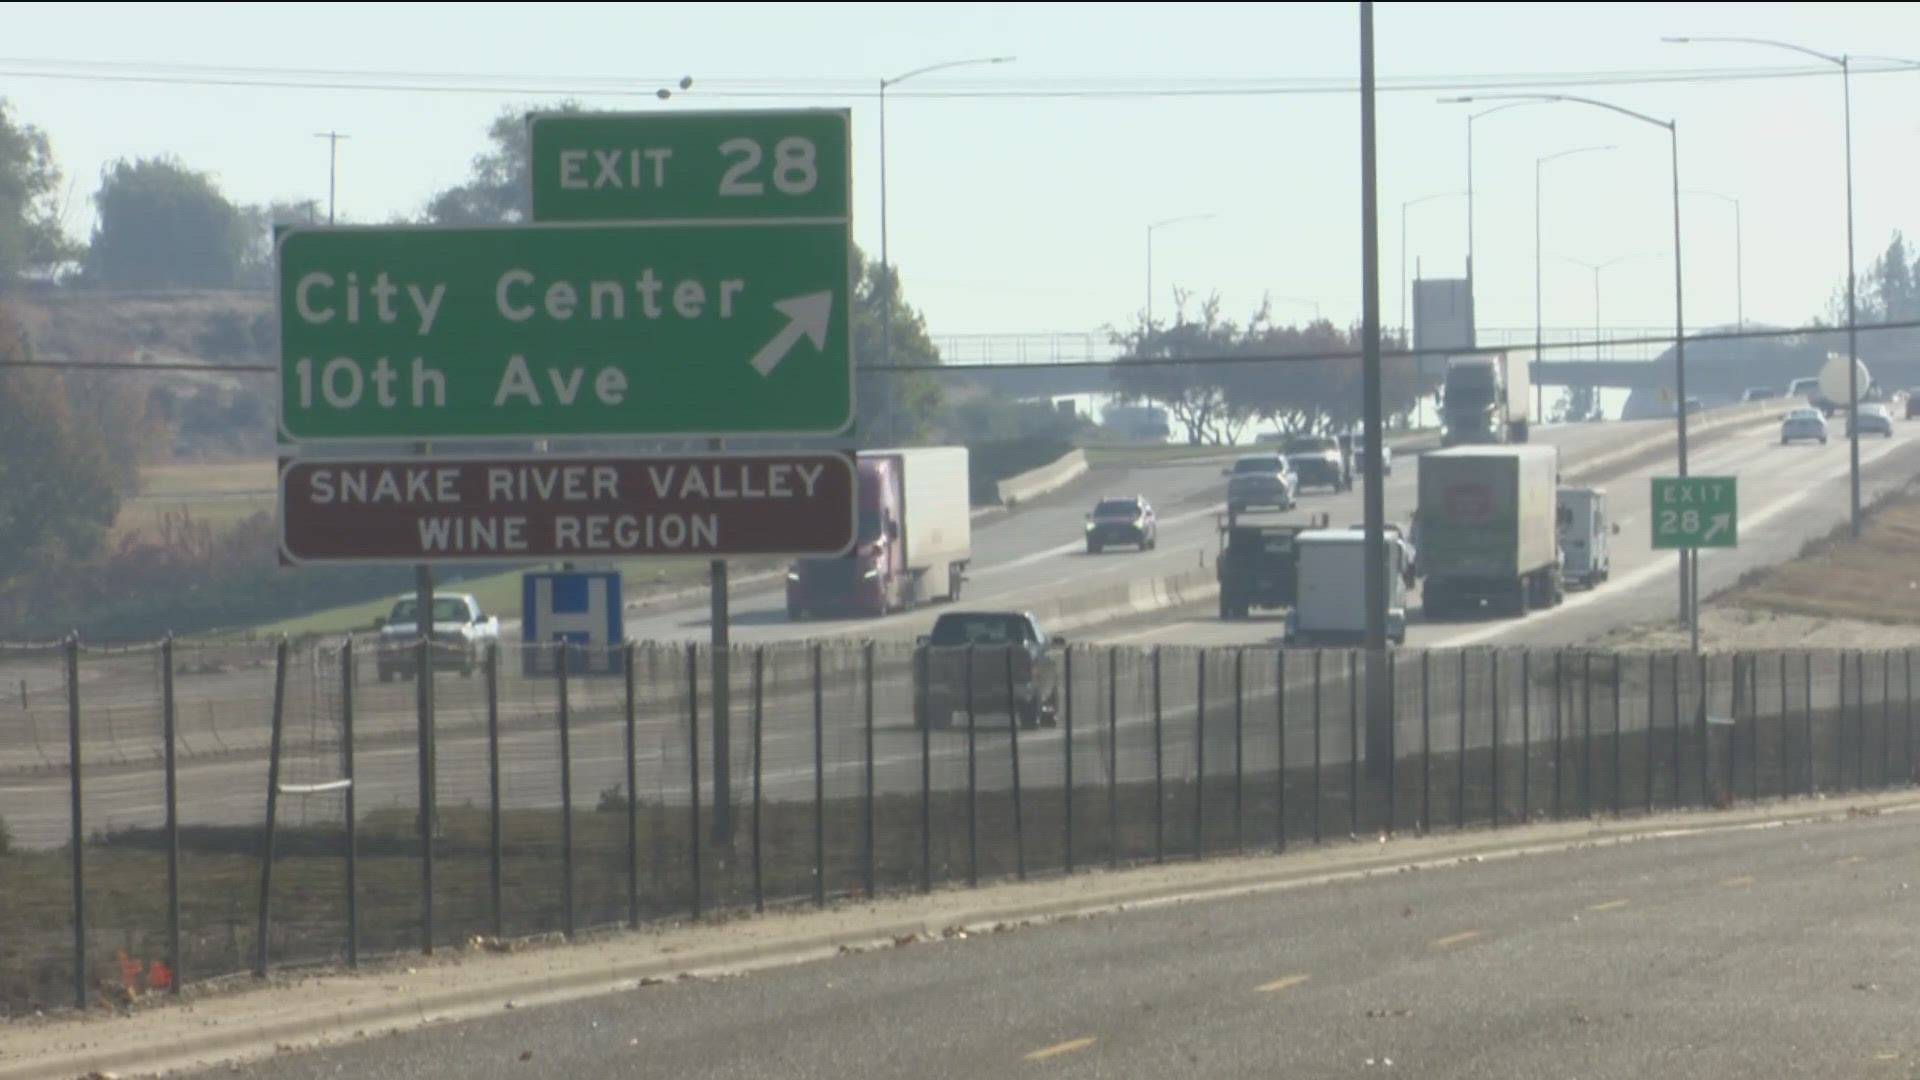 A two-mile stretch of freeway from Centennial Way to Franklin Road will be upgraded with an additional lane, a reconstructed interchange, and other improvements.